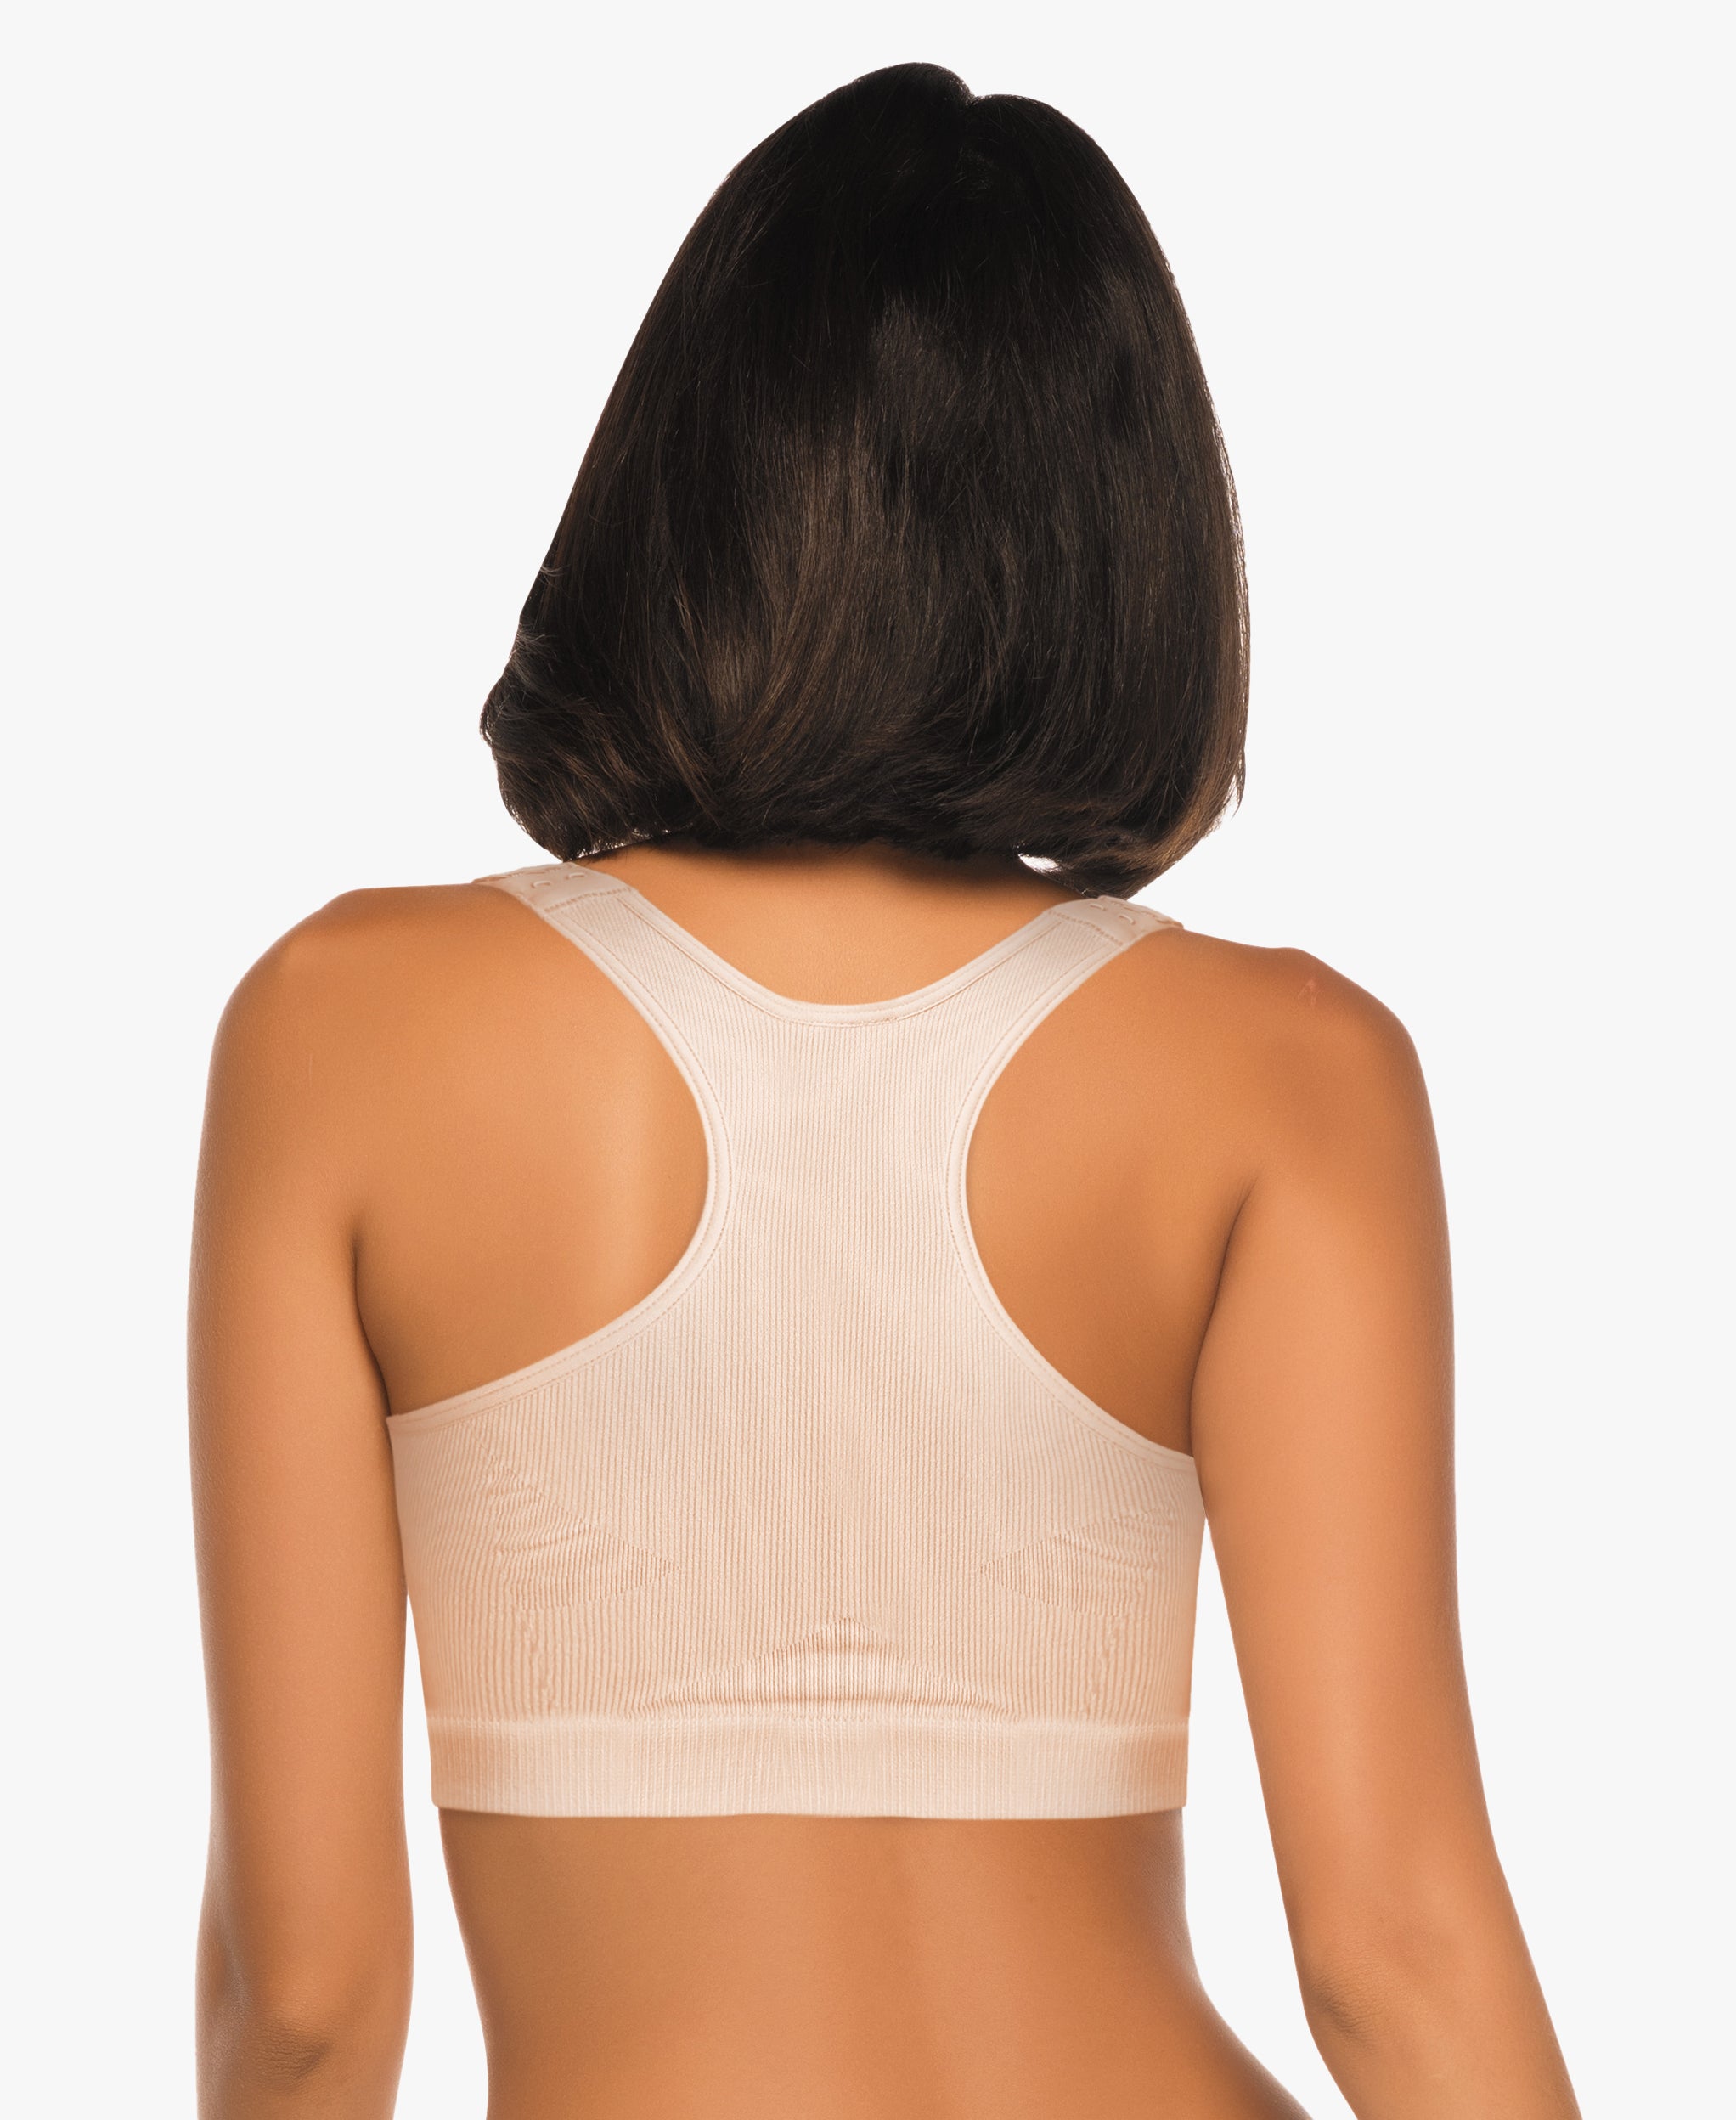 Final Sale Clearance Annette Women's Post-Surgical Softcup Bra